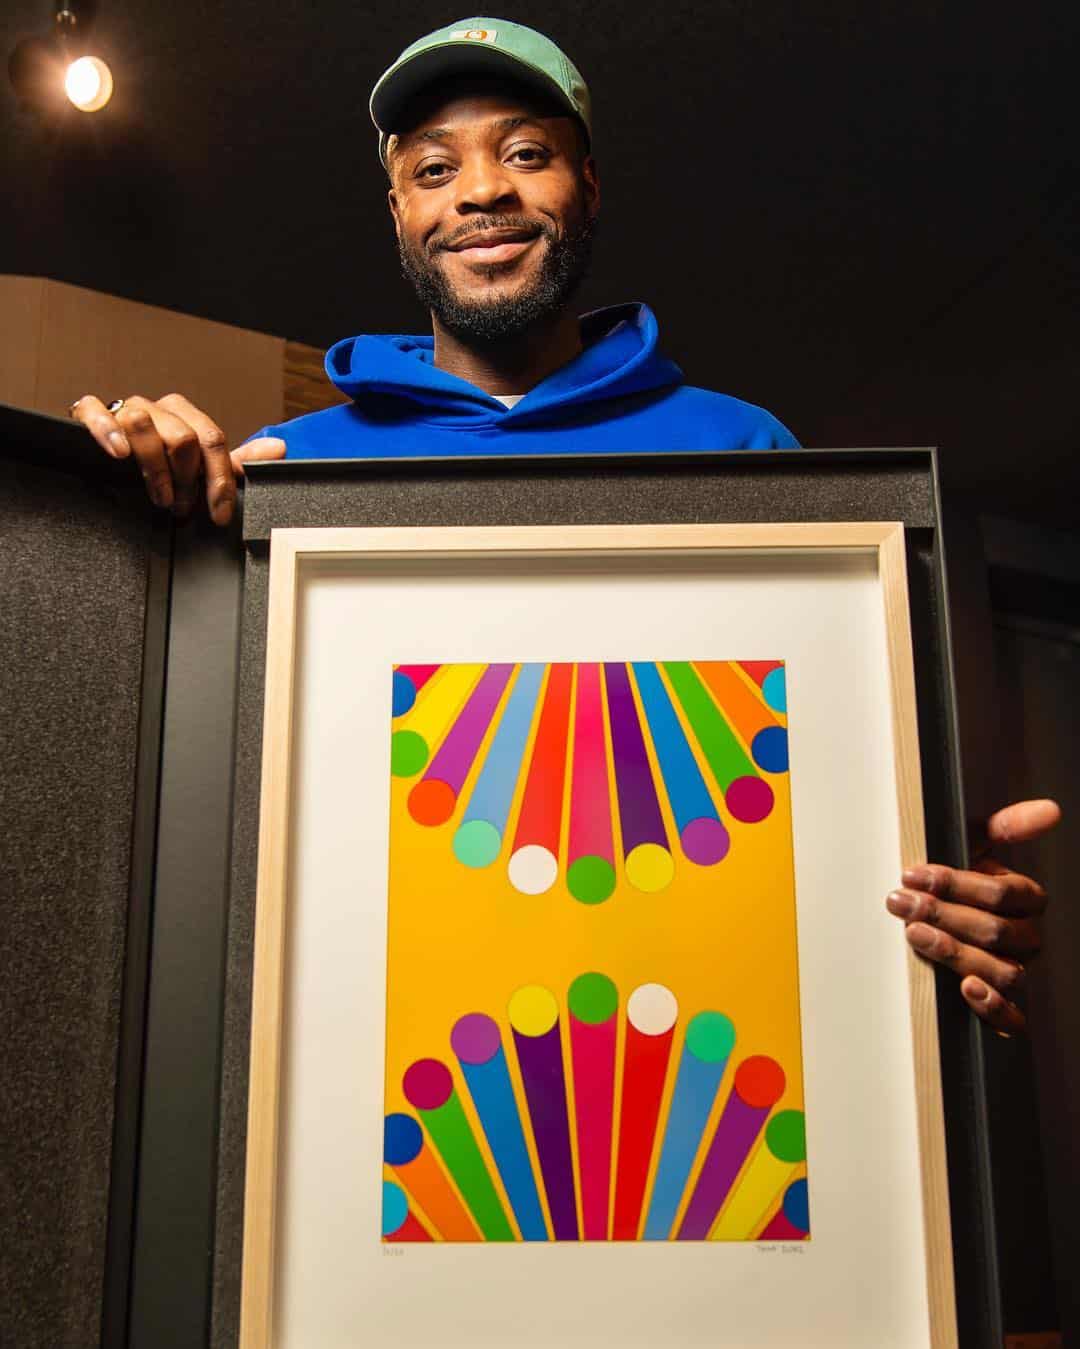 London-based artist, Yinka Ilori, is designing special edition prints for BRIT Awards 2019